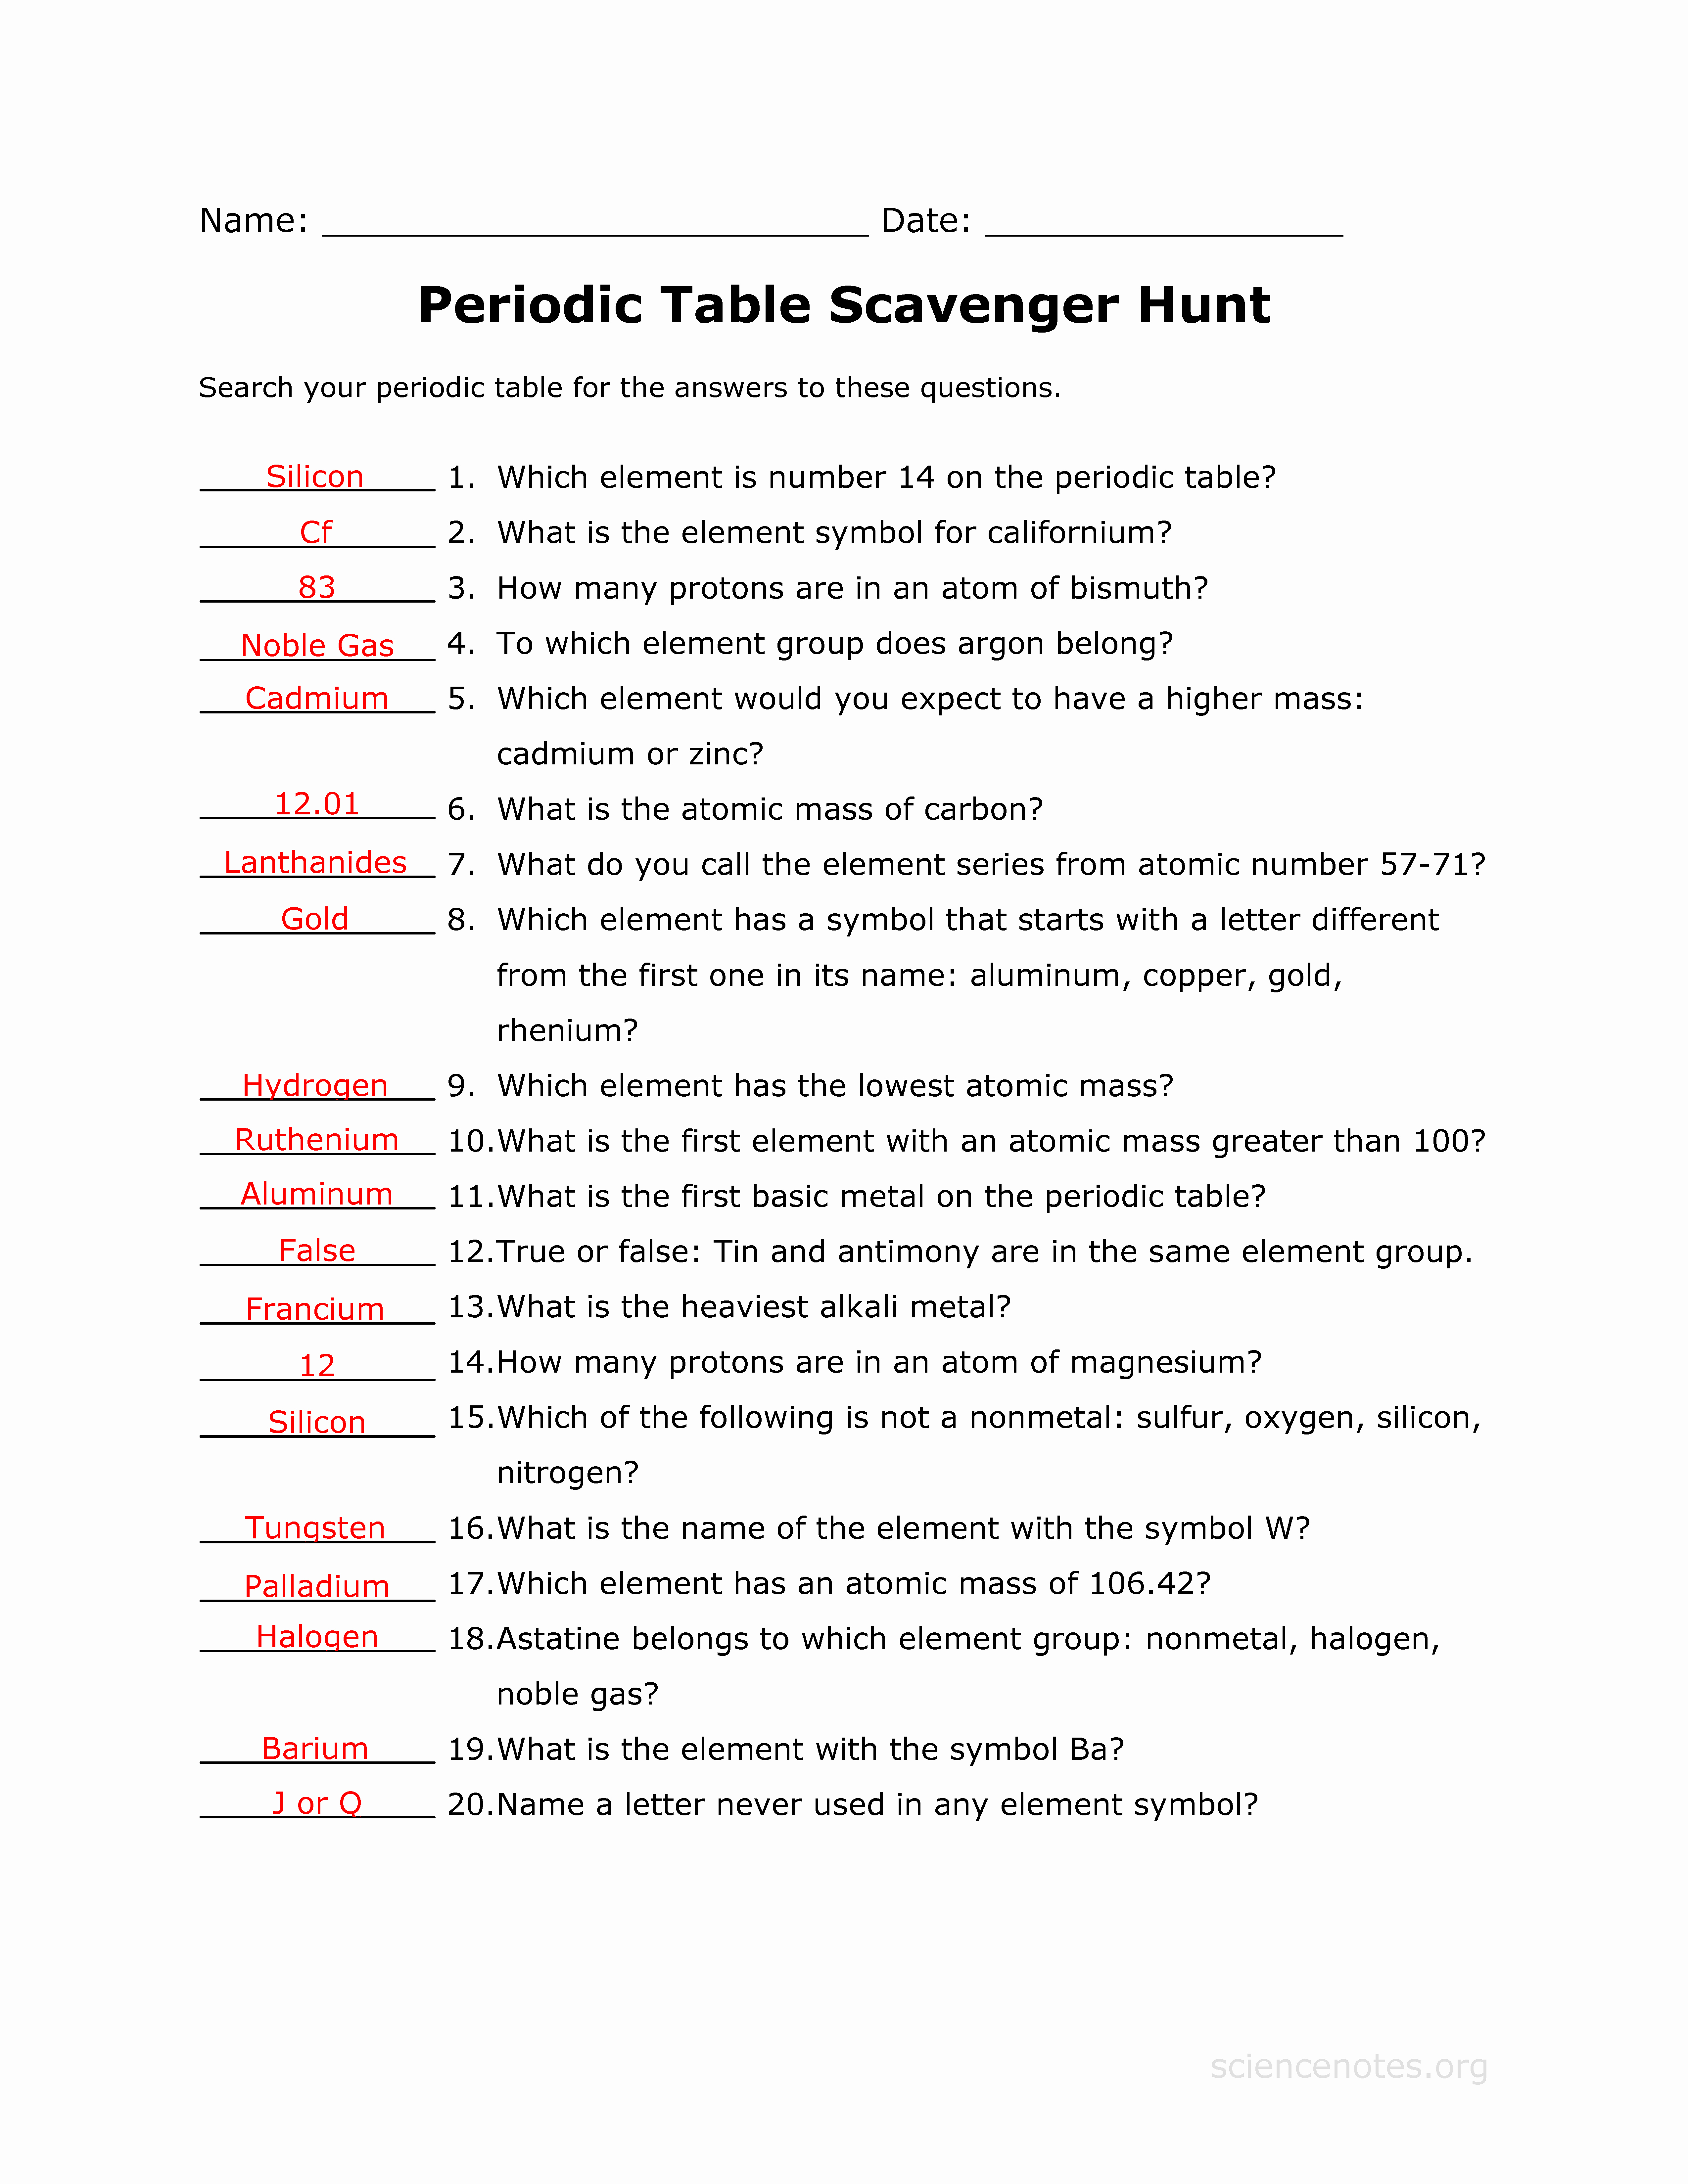 Hunting the Elements Worksheet Answers Beautiful Periodic Table Scavenger Hunt Answer Key Science Notes